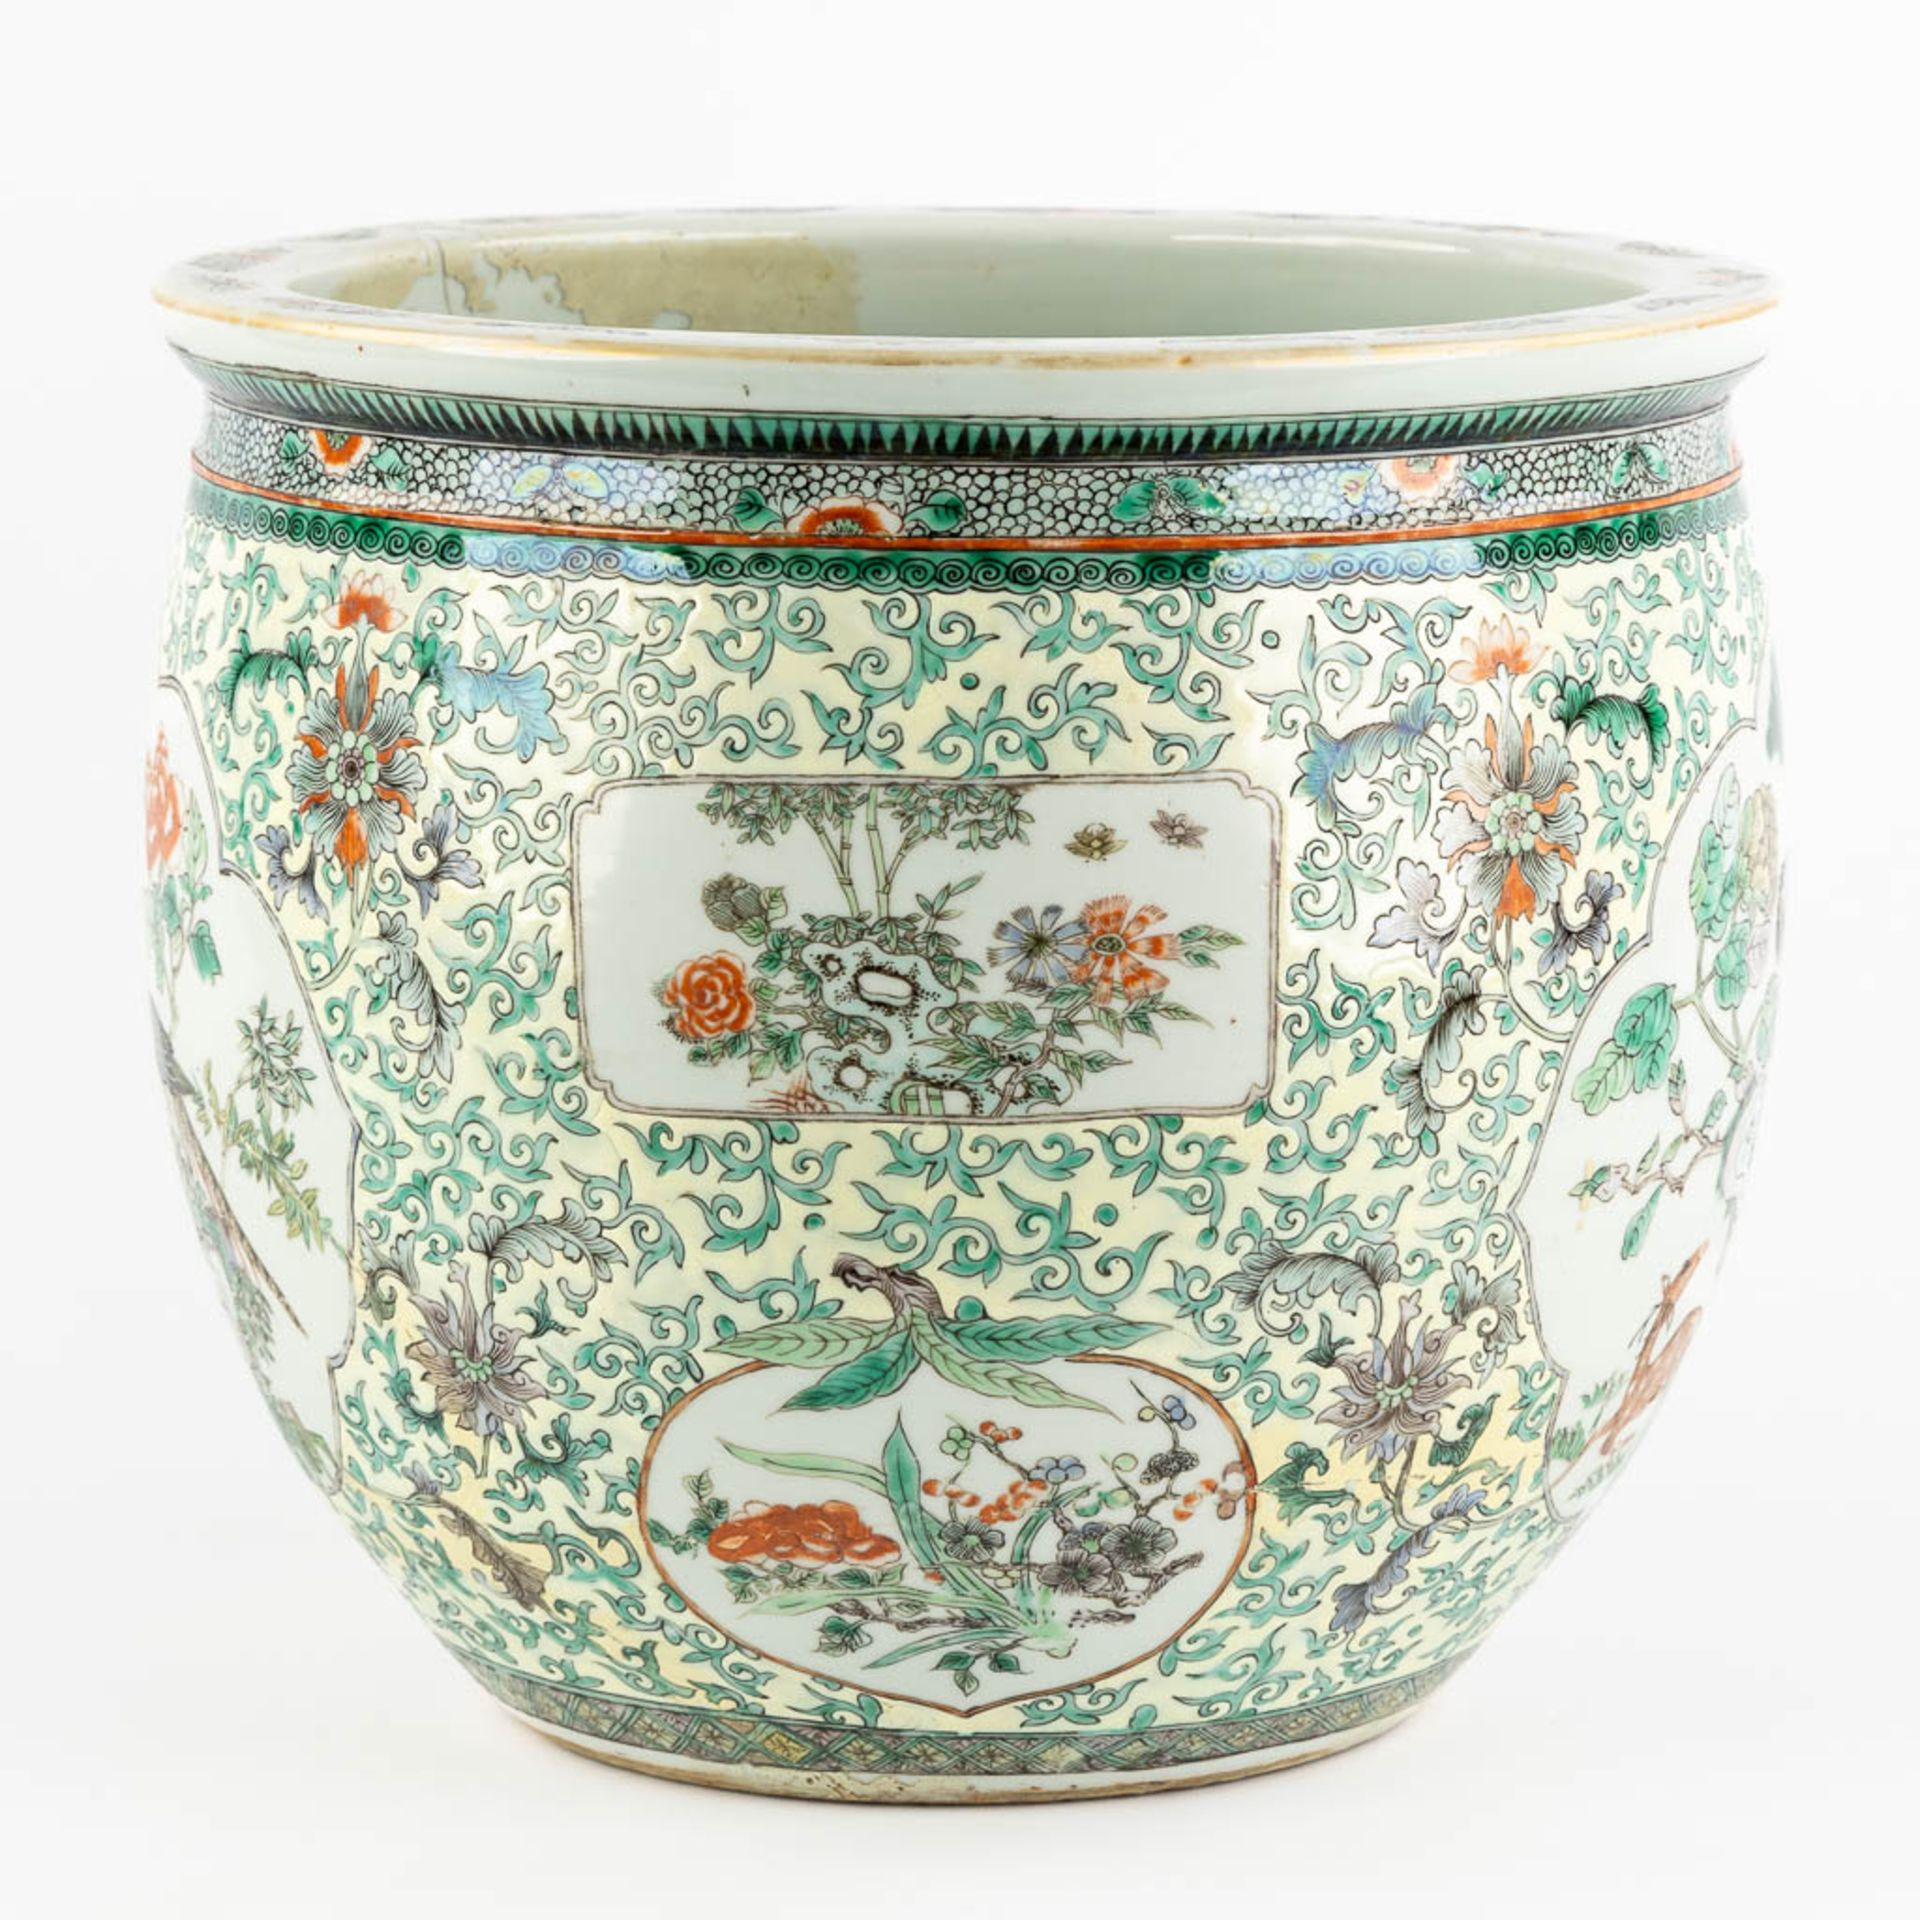 A Large Chinese Cache-Pot, Famille Verte decorated with fauna and flora. 19th C. (H:35 x D:40 cm) - Image 4 of 14